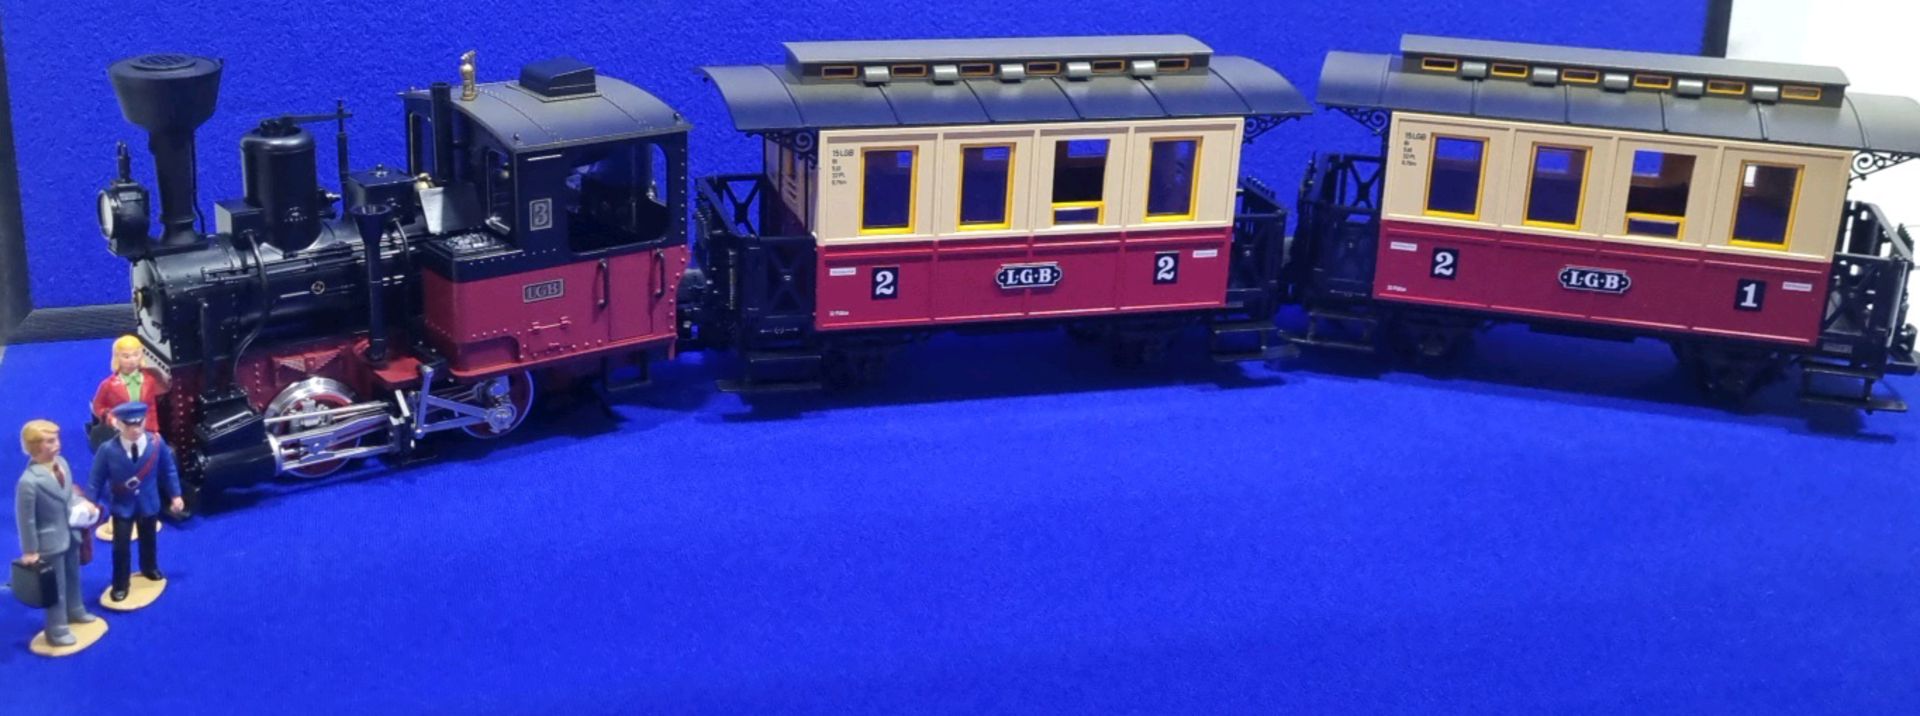 1 x LGB G Scale Trainset SKU72302 RRP £389.99 - Image 3 of 8